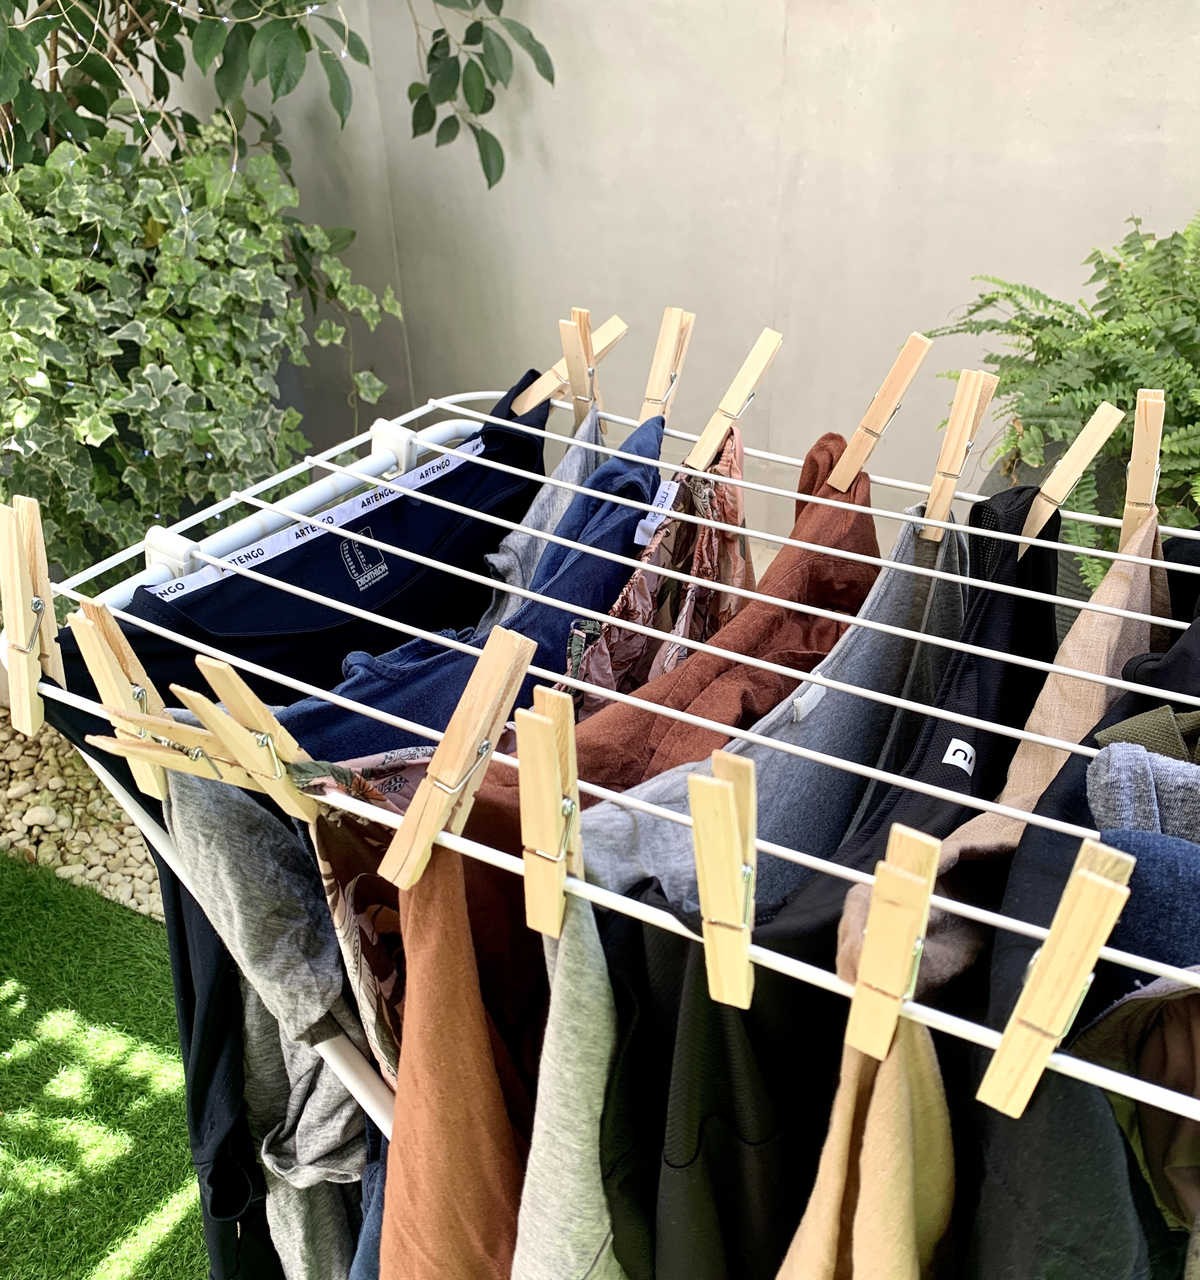 Saves Space on the Drying Rack